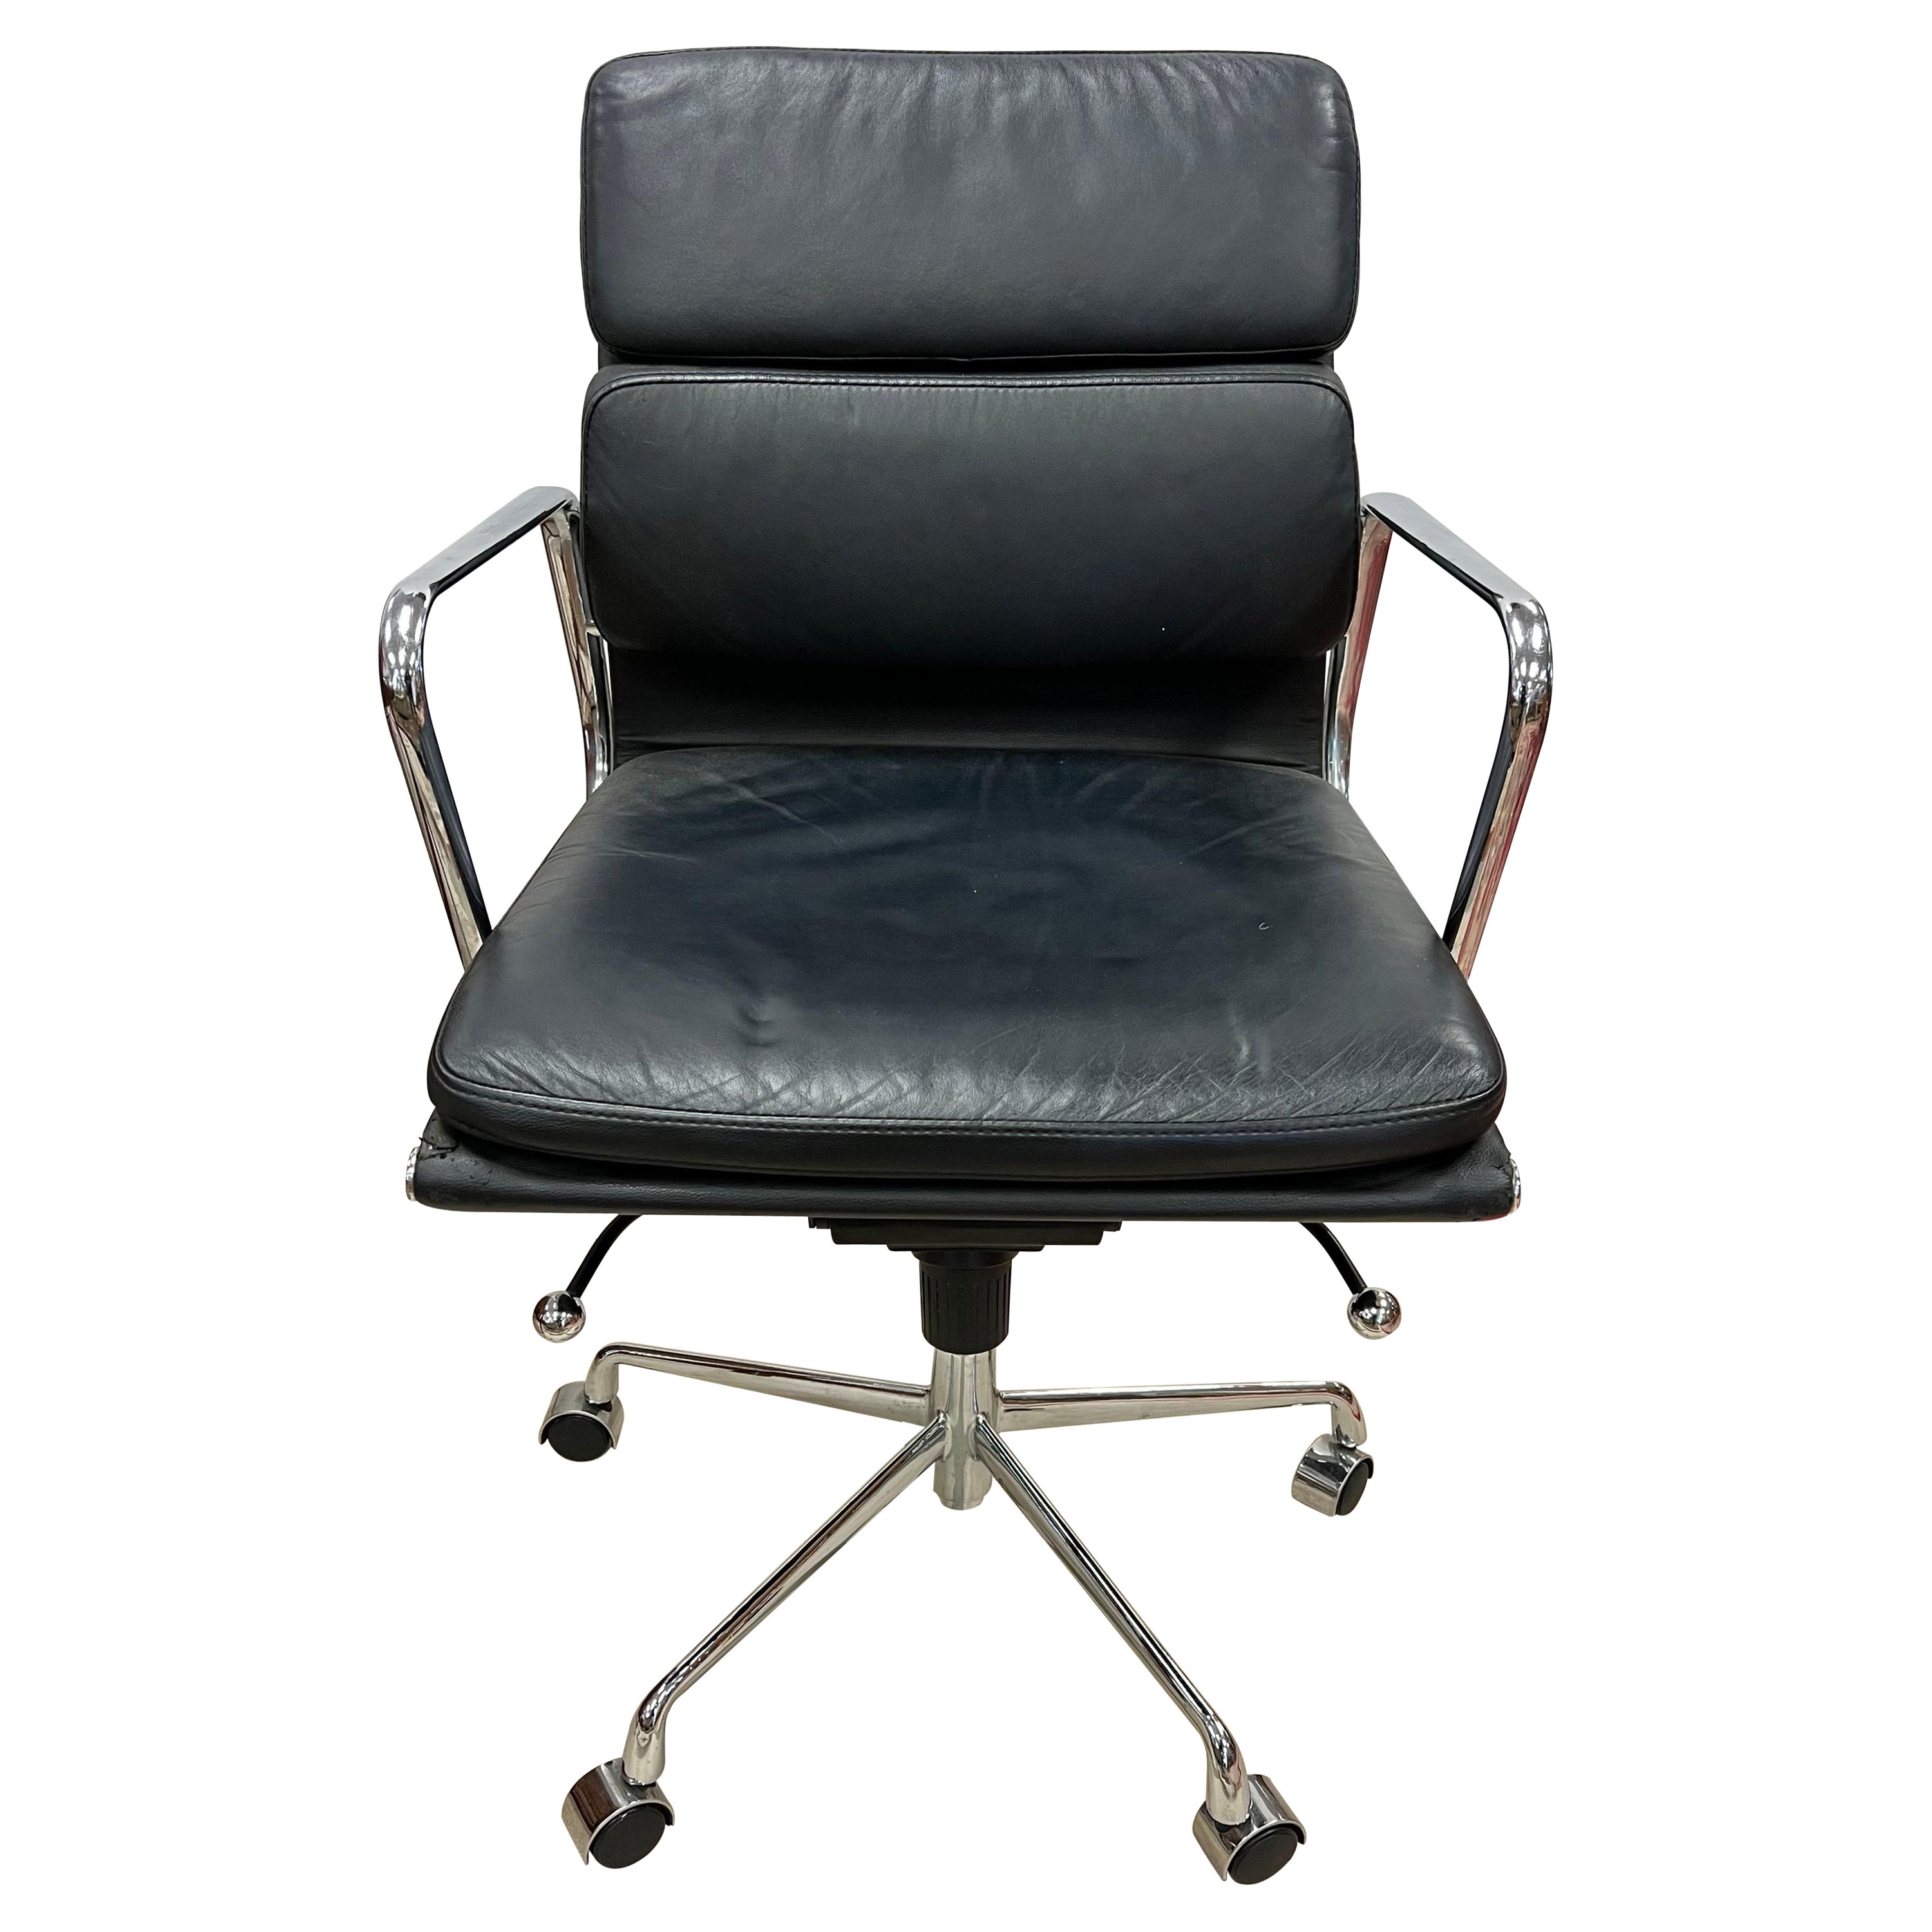 Original Herman Miller Black Leather Soft Pad Executive Office Chair Eames